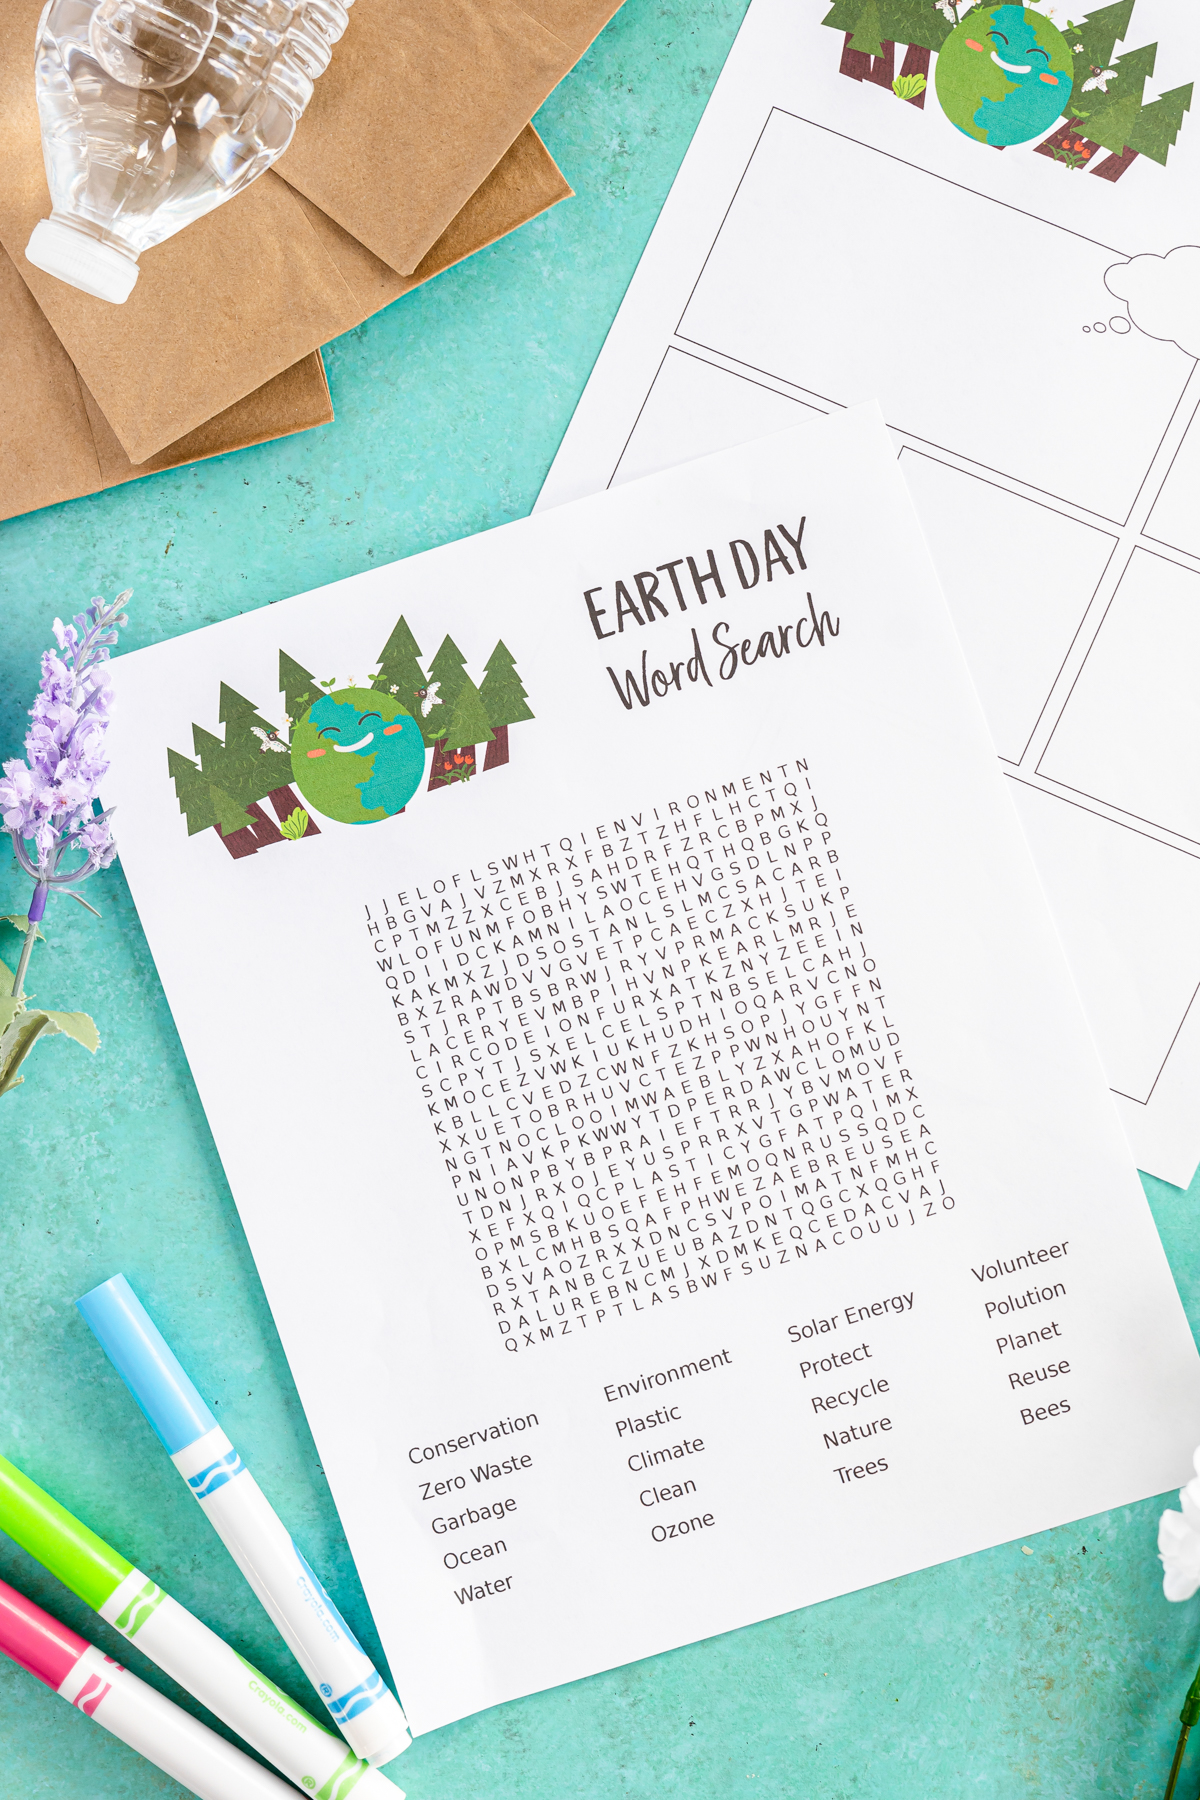 printed out Earth Day word search